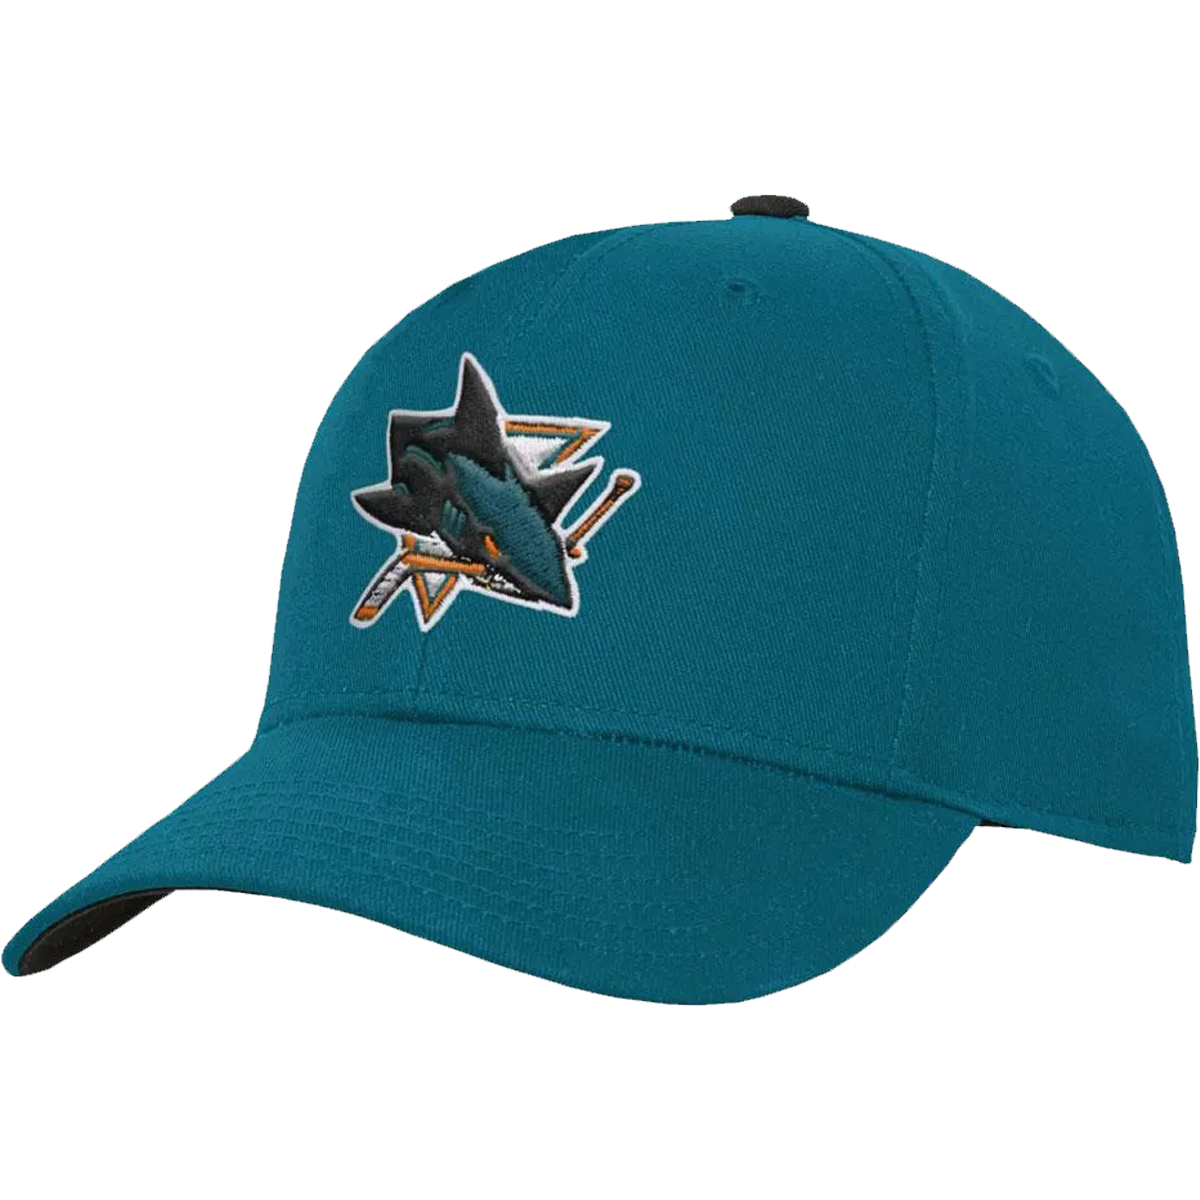 Youth Sharks Precurved Snap alternate view